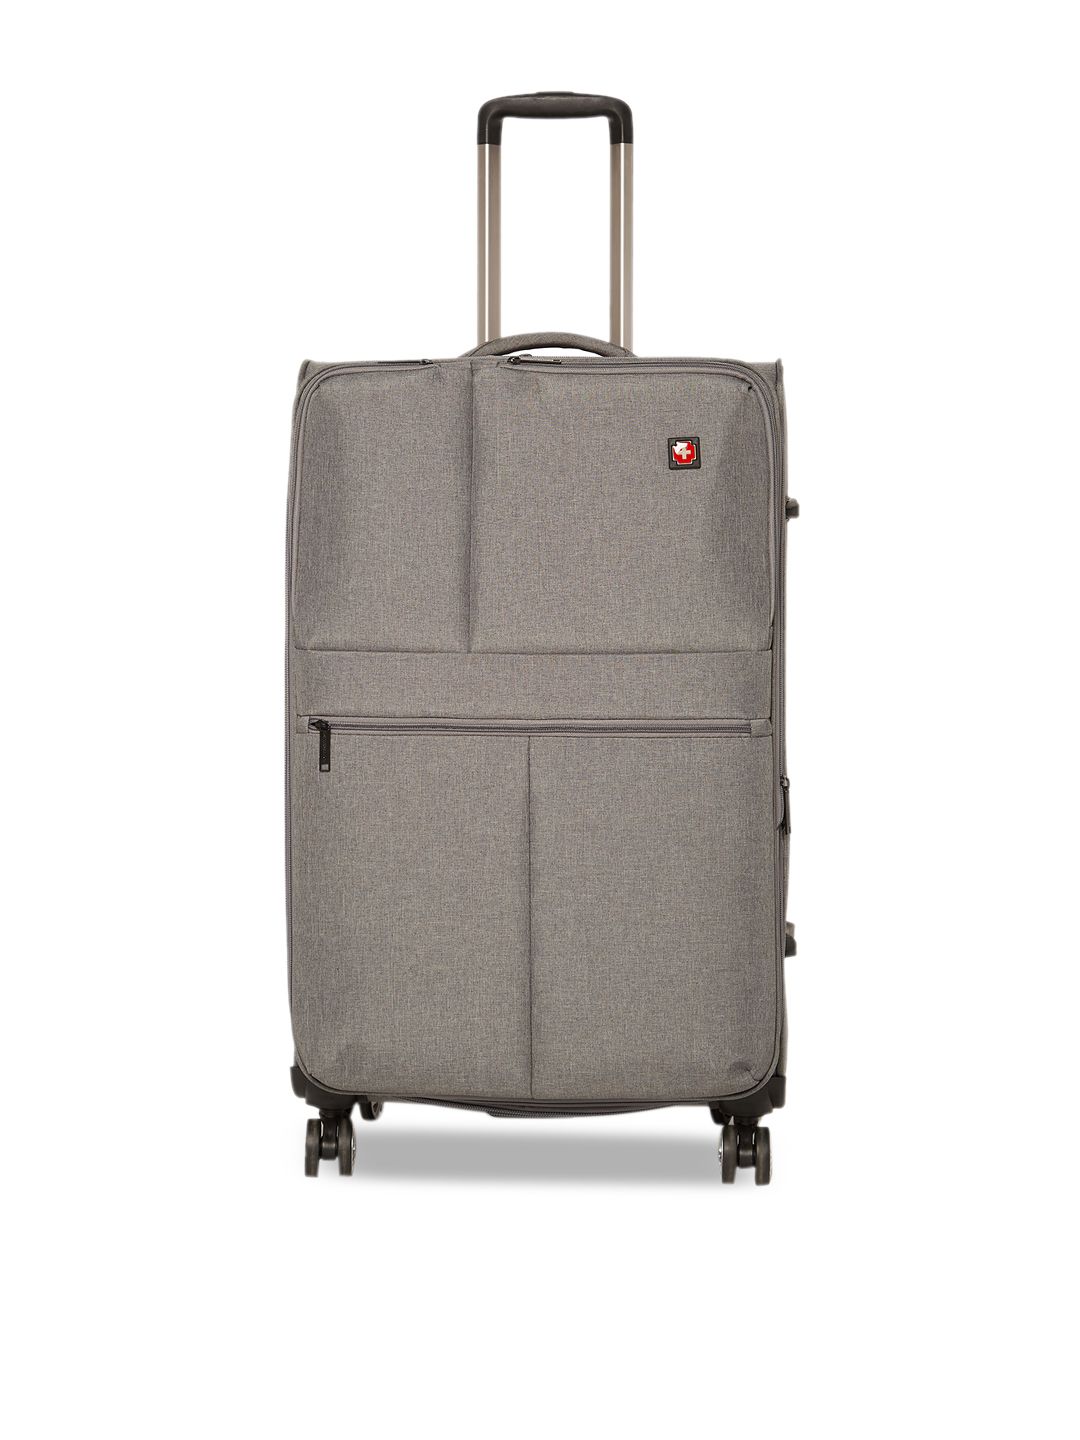 SWISS BRAND Unisex Grey Solid Vevey 360-Degree Rotation Soft-Sided Large Trolley Suitcase Price in India